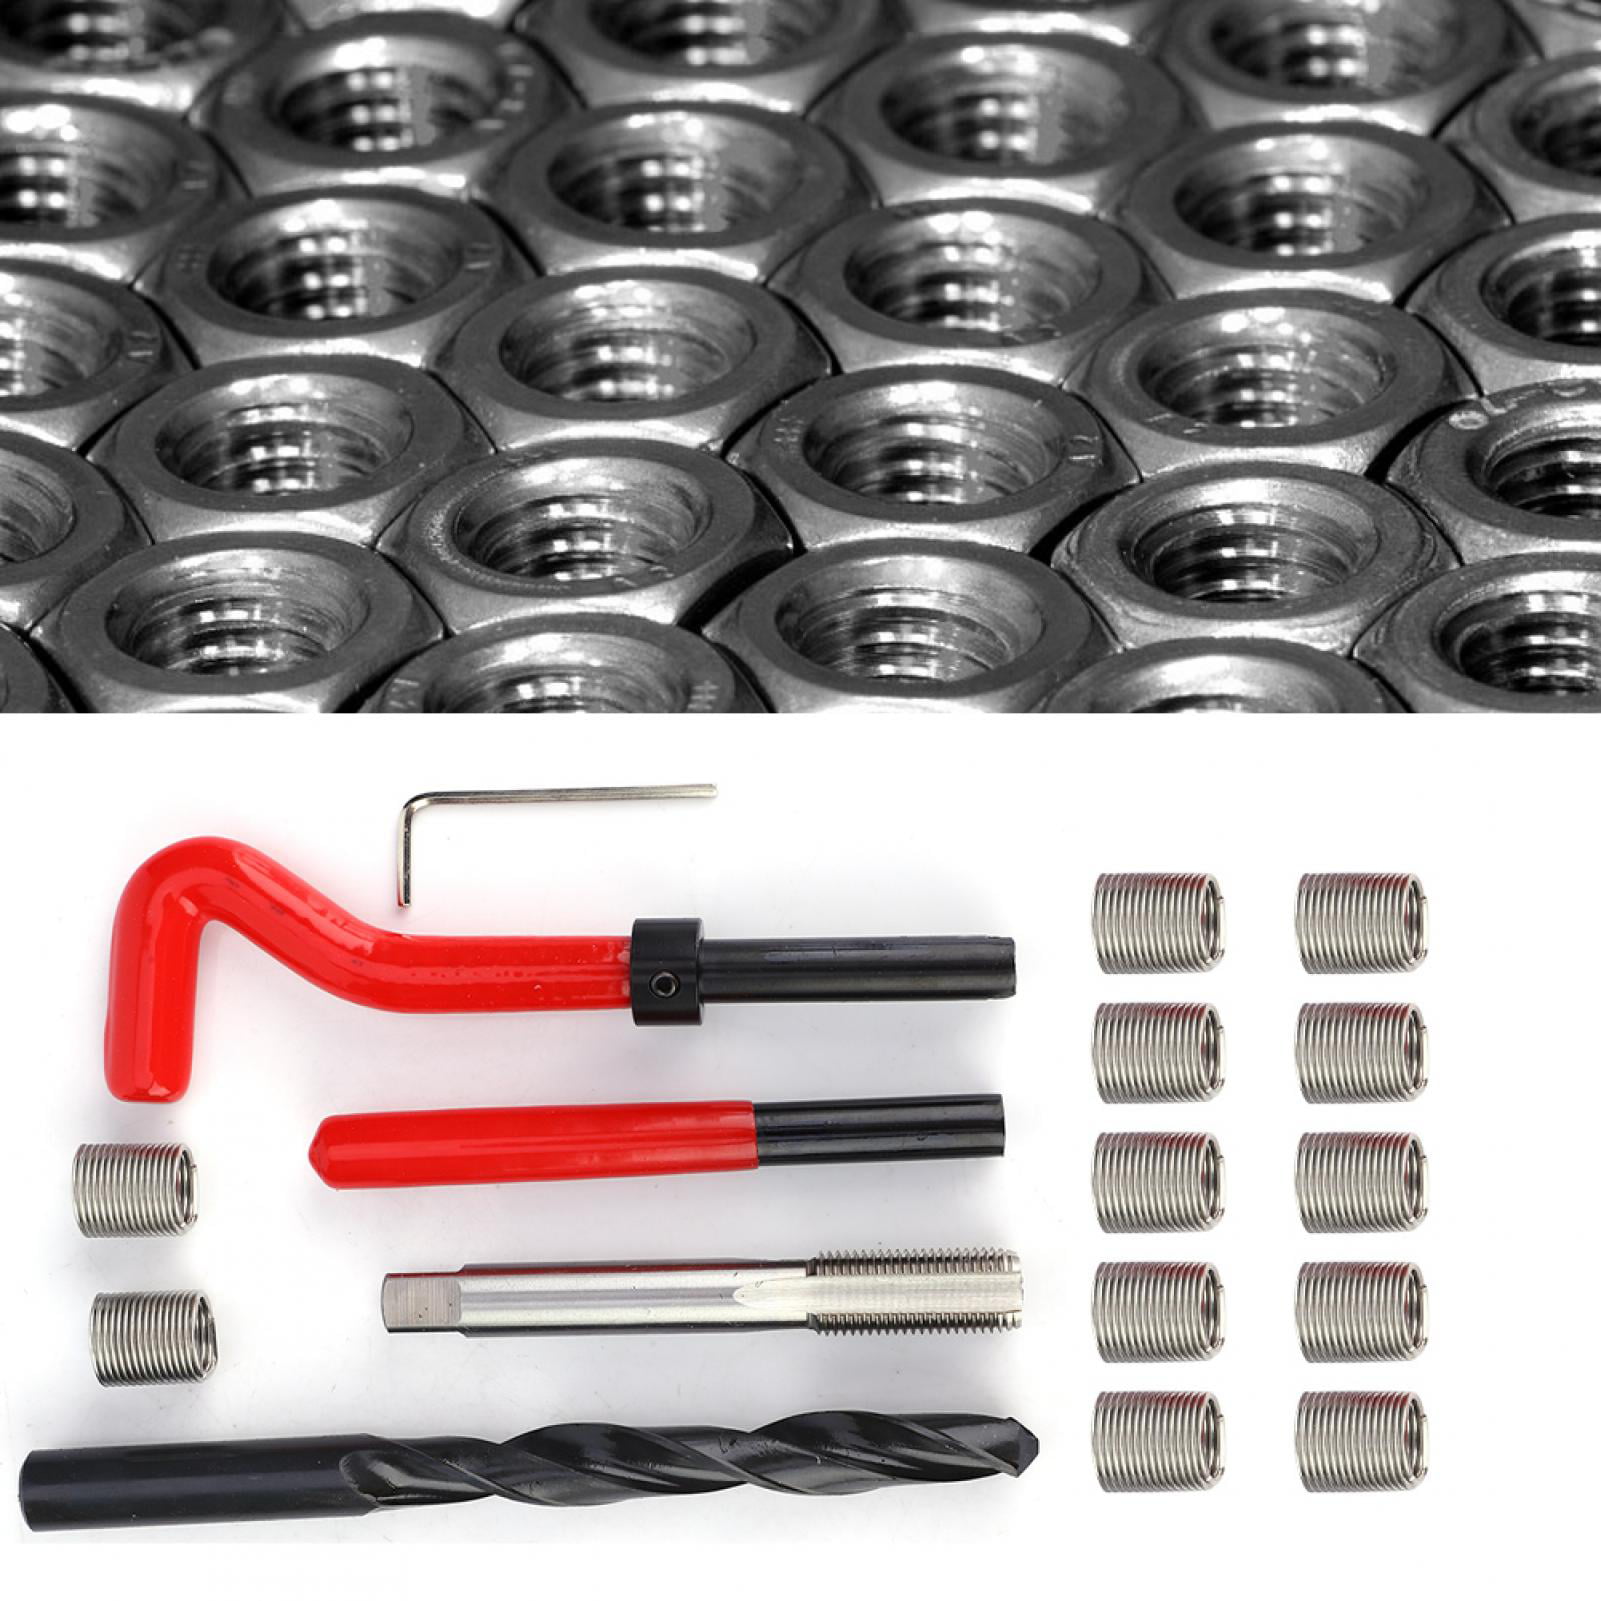 17Pcs Thread Repair Kit,M10x1.5 Stainless Steel Twisted Drill Tap Wrench Threaded Insert Tool,Metric-Imperial Units Conversion Helicoil Repair Kit 